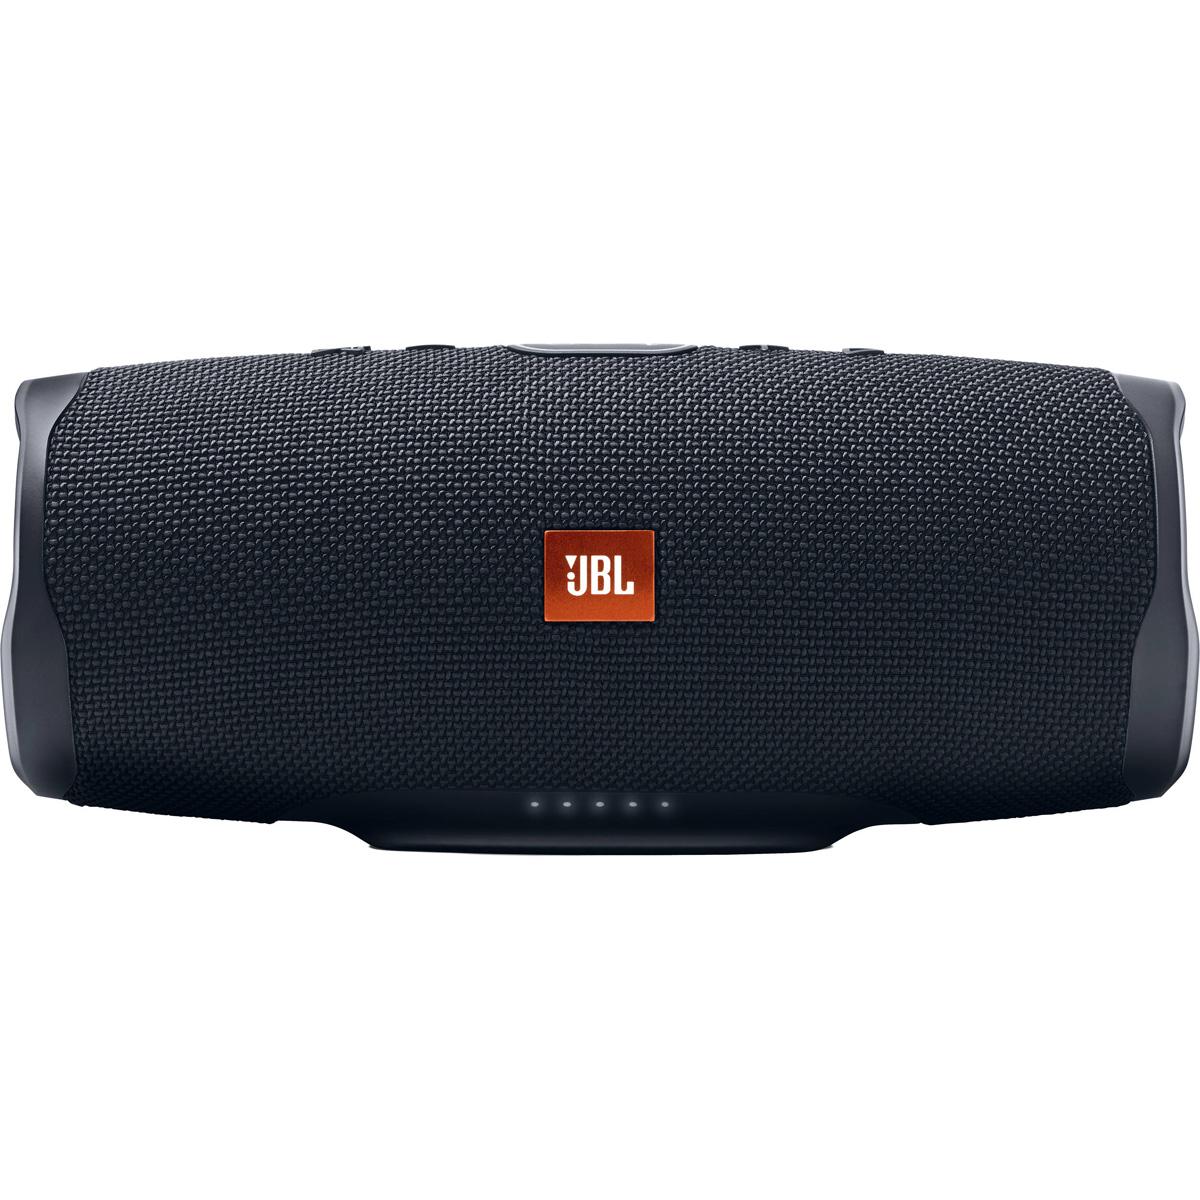 JBL Charge 4 Portable Bluetooth Speaker for $99.99 Shipped